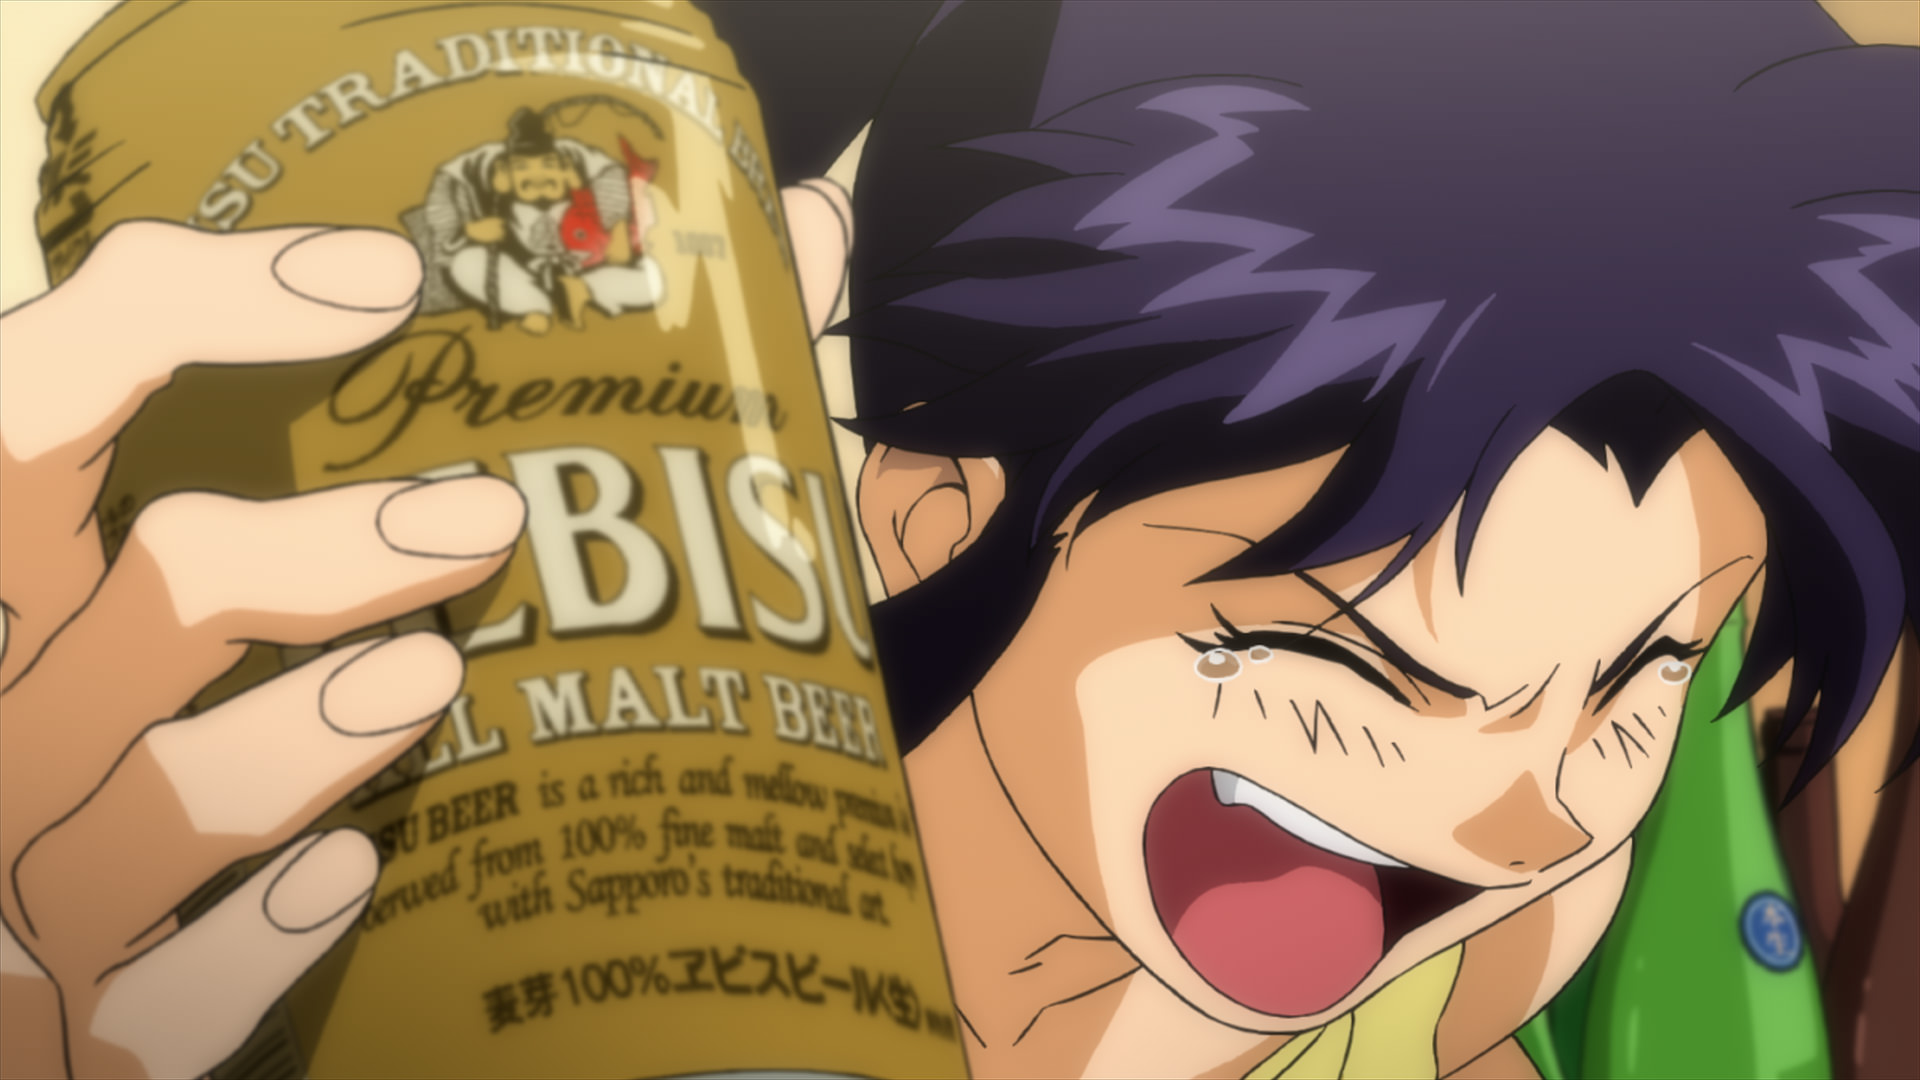 How Much Beer Does Evangelion's Misato Actually Drink? 